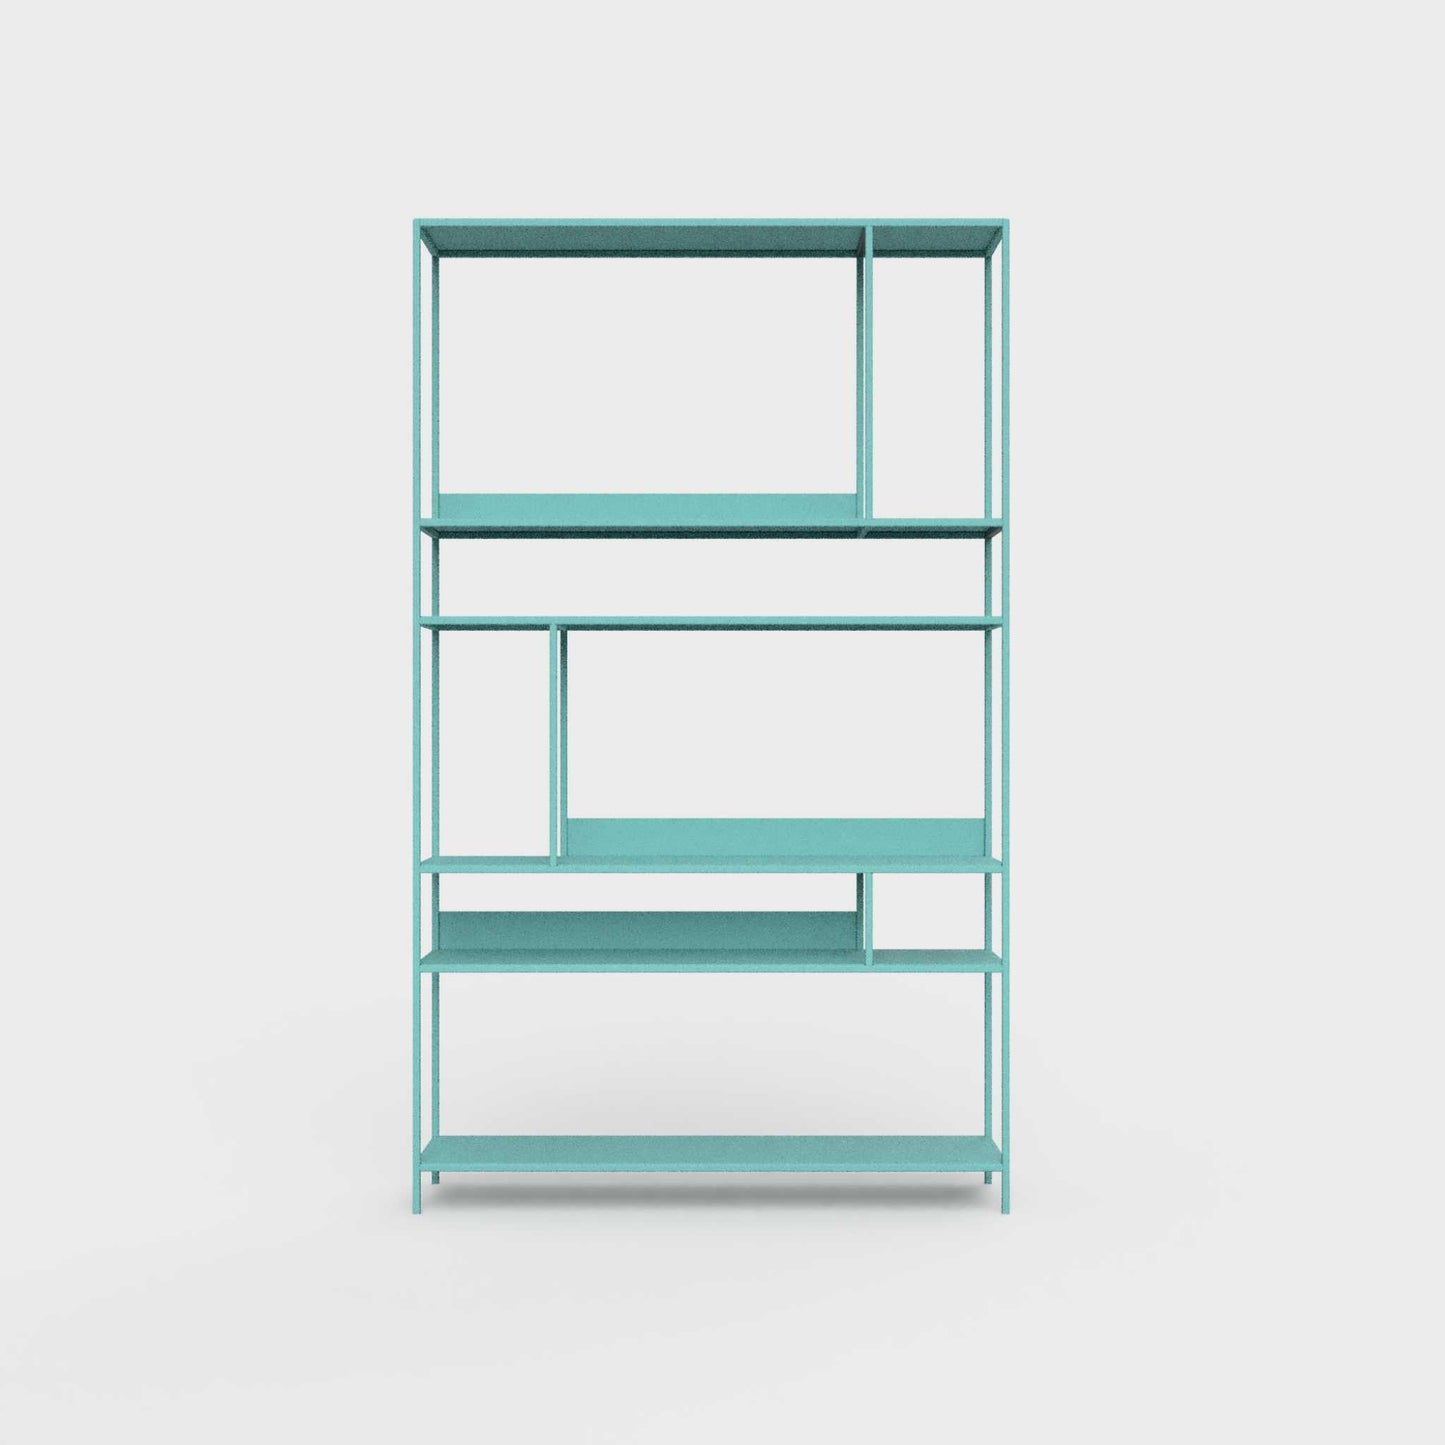 ÉTAUDORÉ Floks 01 powder coated steel bookcase in forget-me-not blue / green